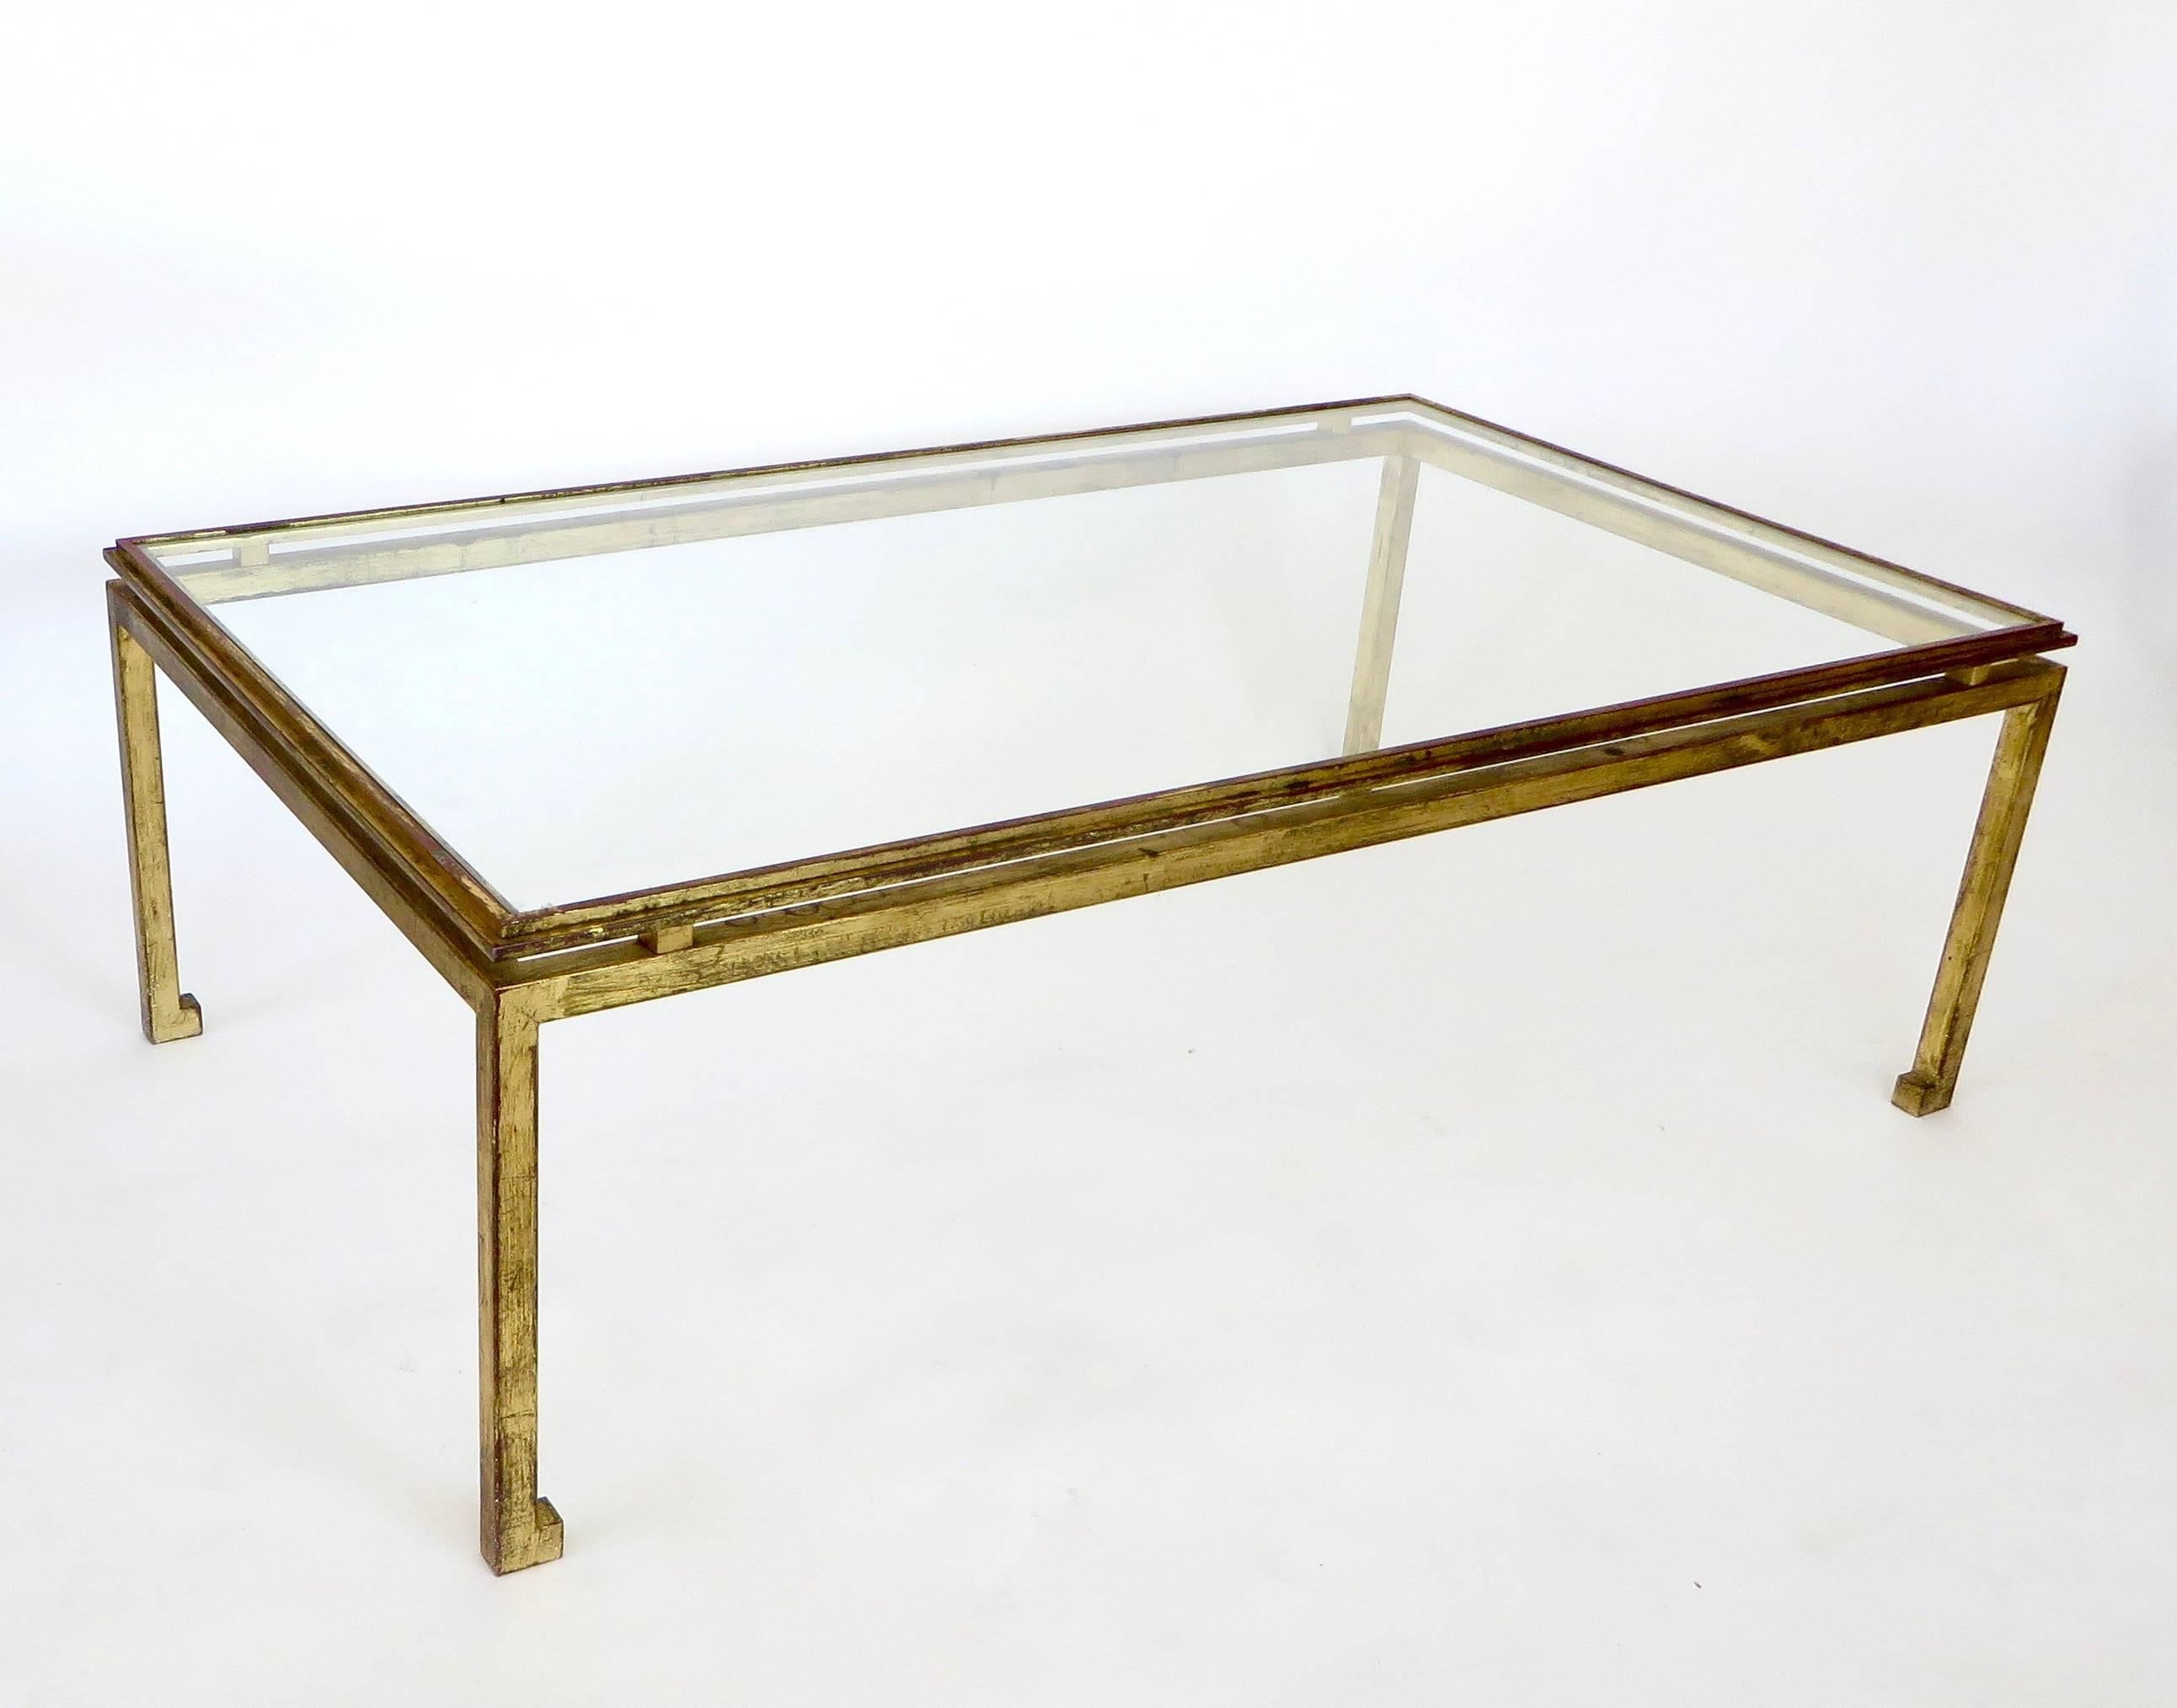 Maison Ramsay superb patina gilded wrought iron, rectangular coffee table with a St. Gobain glass plateau. See detail photo with St. Gobain glass insignia. The legs are solid iron, 1 inch thick not tubular and very heavy. Measure: The foot is 1.75